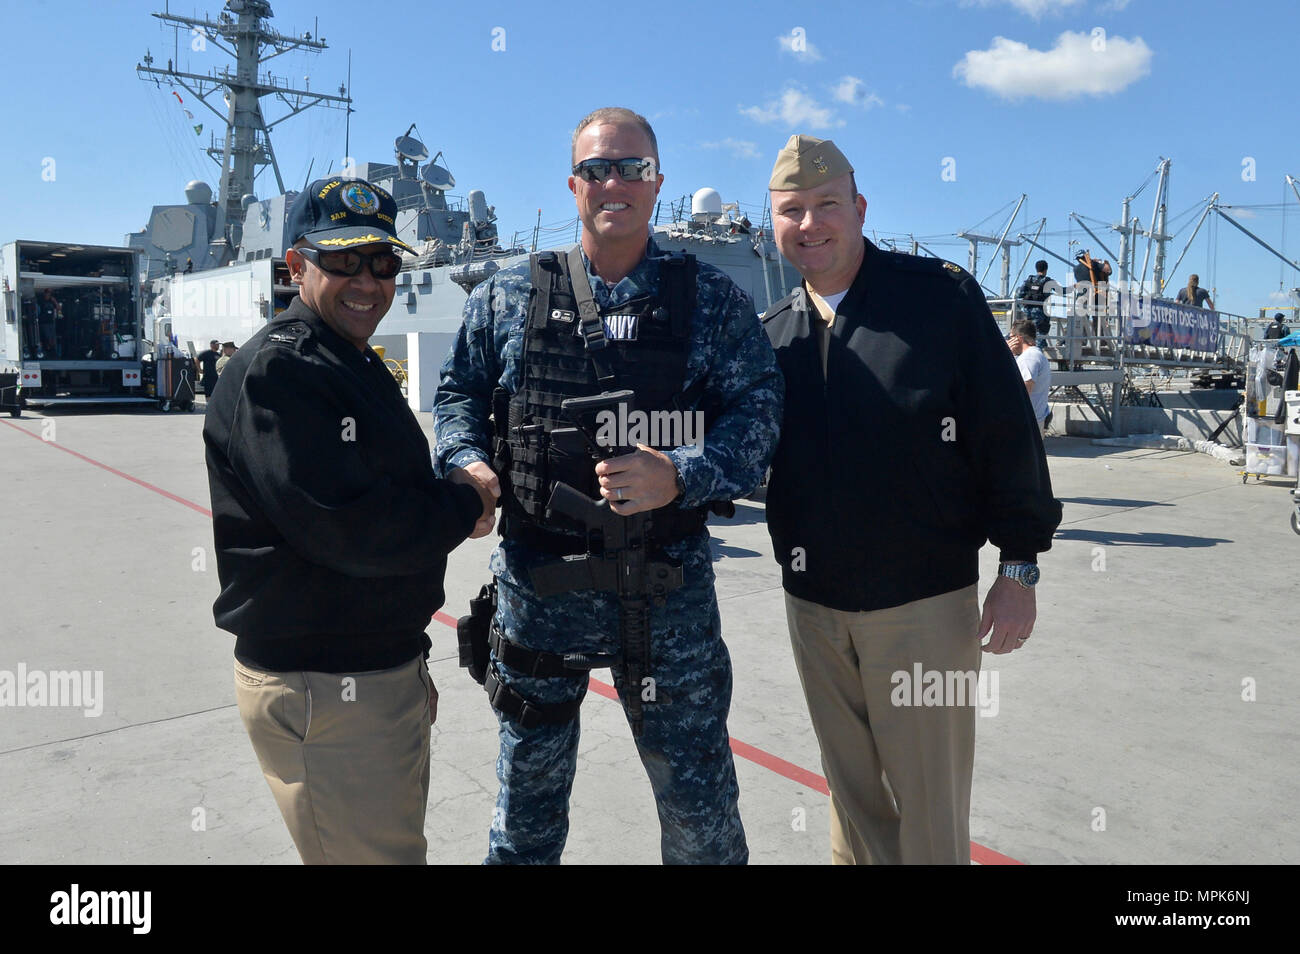 170323-N-IE405-028 SAN DIEGO (March 23, 2017) Naval Base San Diego Commanding Officer Capt. Roy Love, left, and Command Master Chief Matt Ruane greet actor Adam Baldwin prior to the filming of the television show 'The Last Ship'. (U.S. Navy photo by Mass Communication Specialist 2nd Class Indra Bosko/Released) Stock Photo